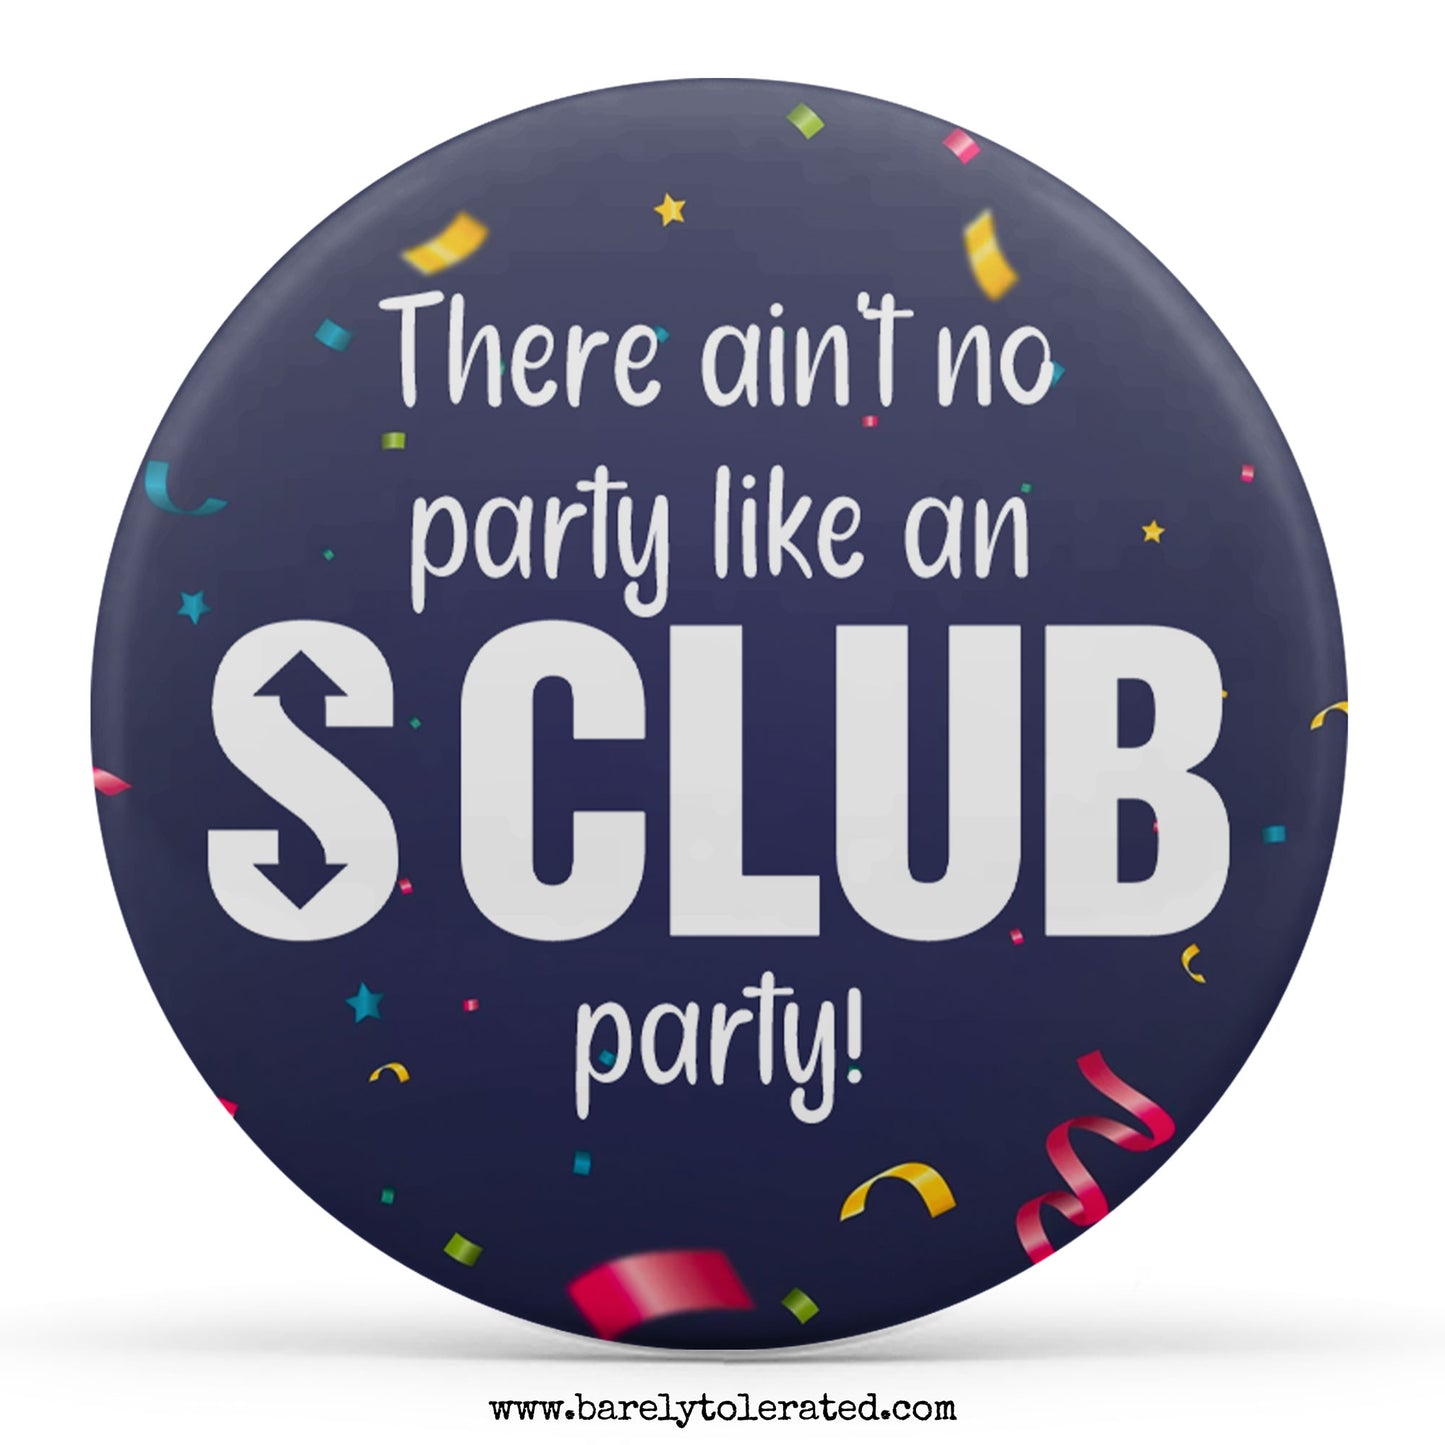 There Ain't No Party Like An S Club Party